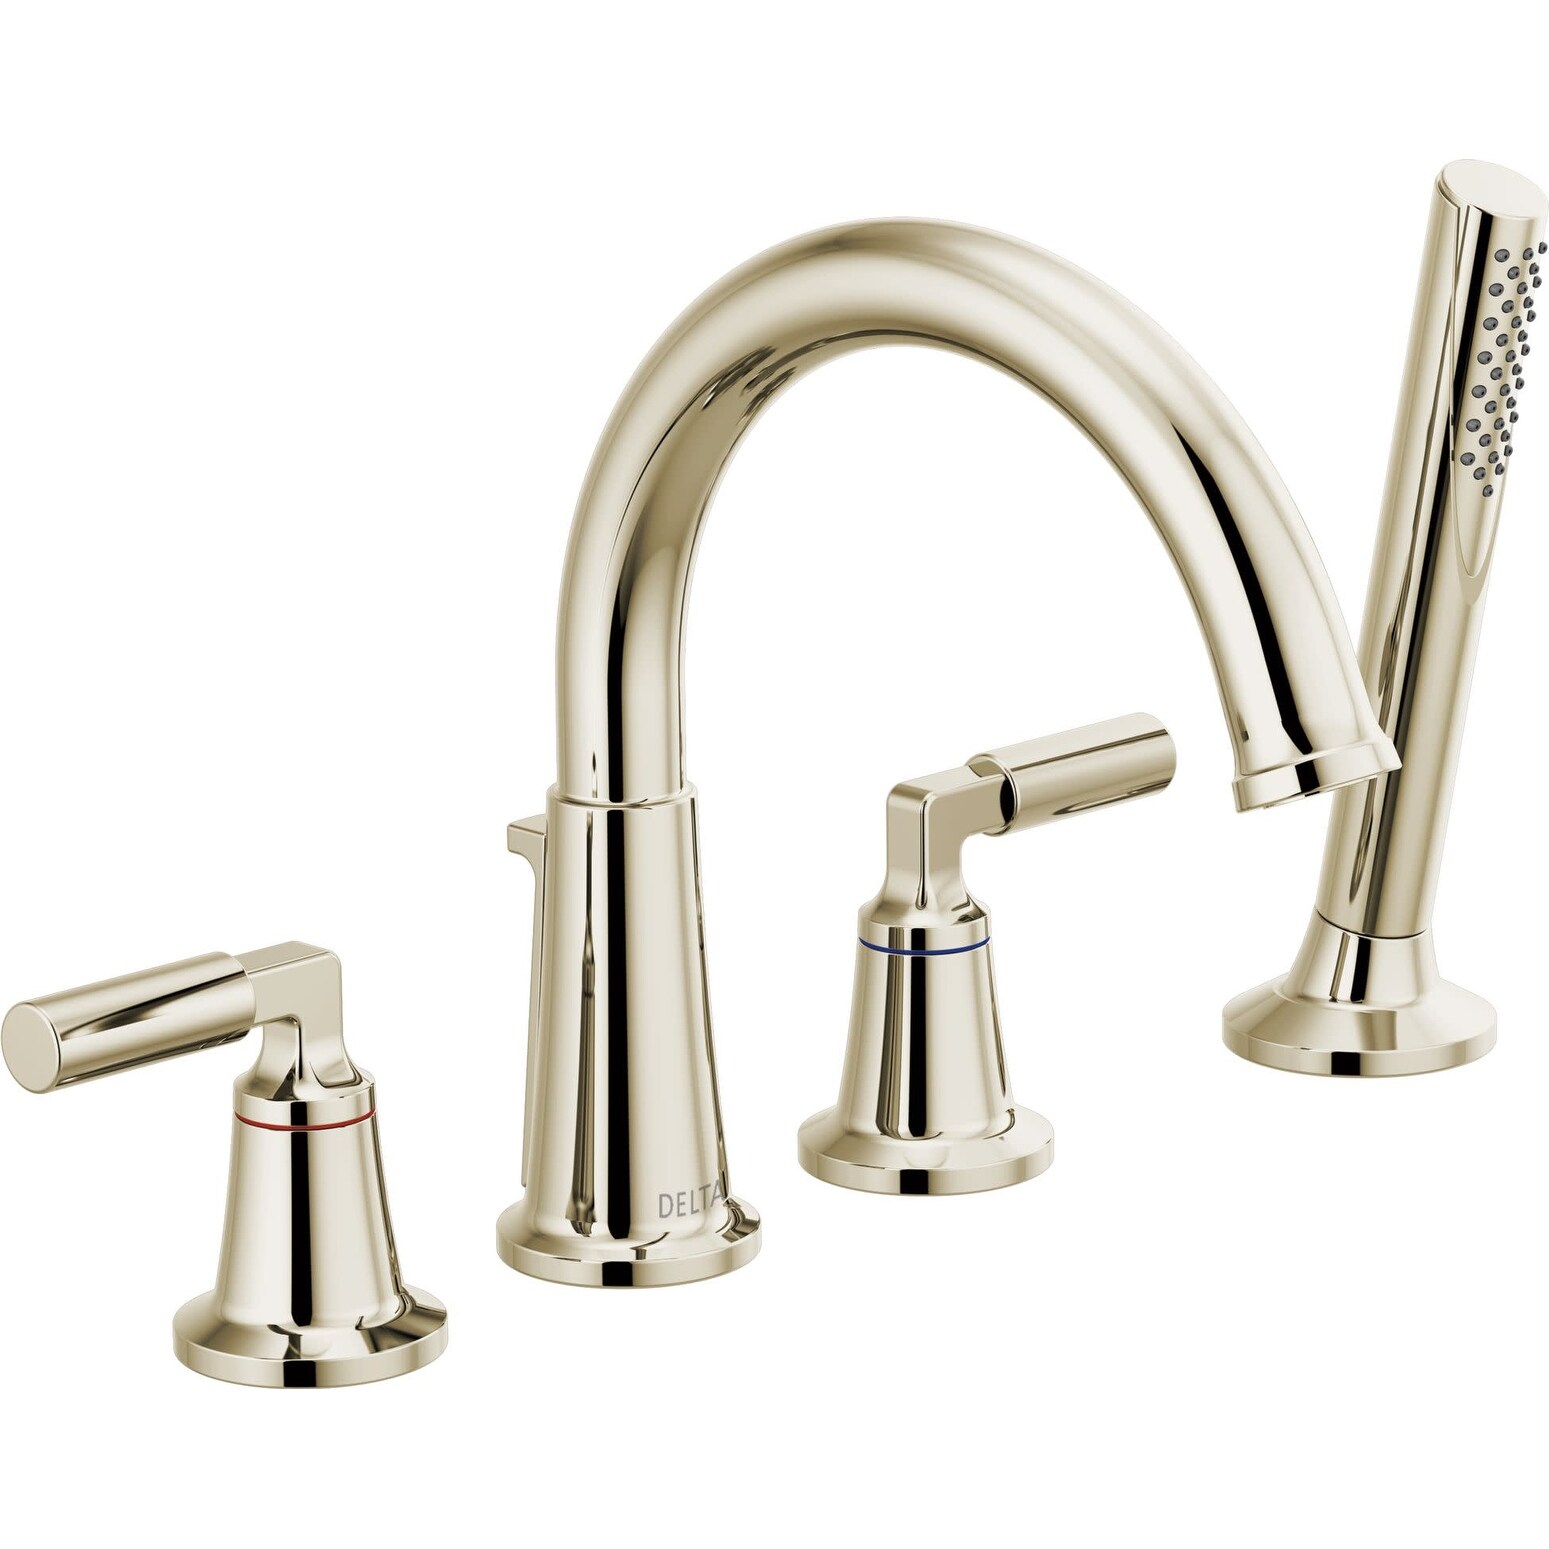 Delta Bowery Deck Mounted Roman Tub Filler with Built-In Diverter and